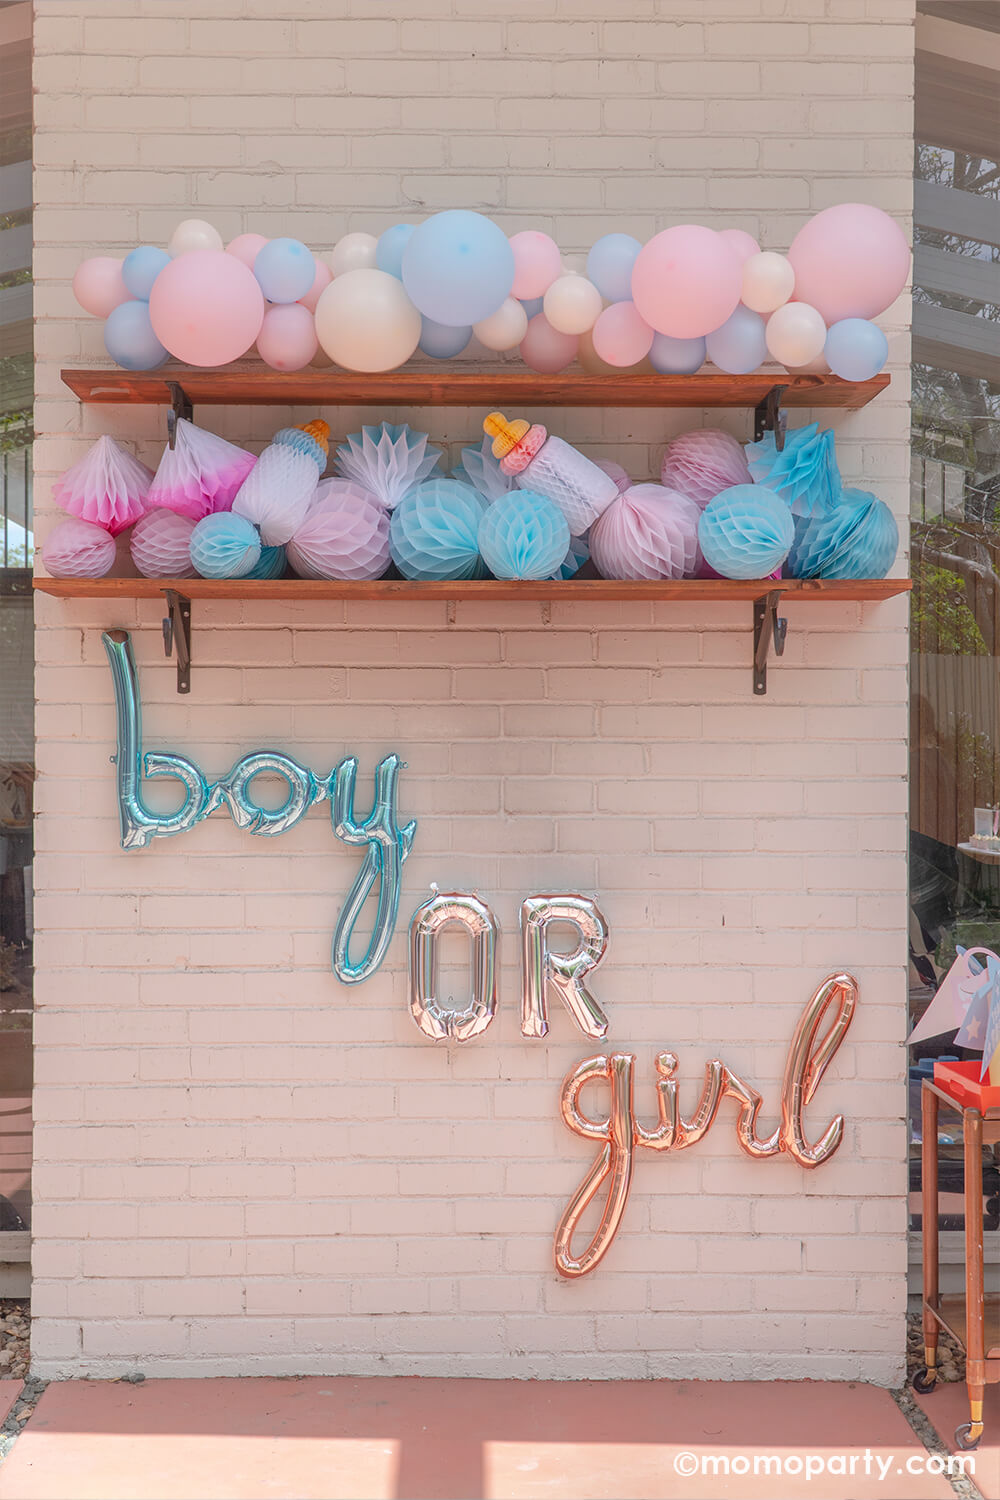 Boy or girl? A gender revel party by Momo Party, a brick wall decorated with script foil letter balloons and a wall filled with honeycomb decorations in pink and blue and a boho pastel color balloon garland in baby pink and baby blue colors